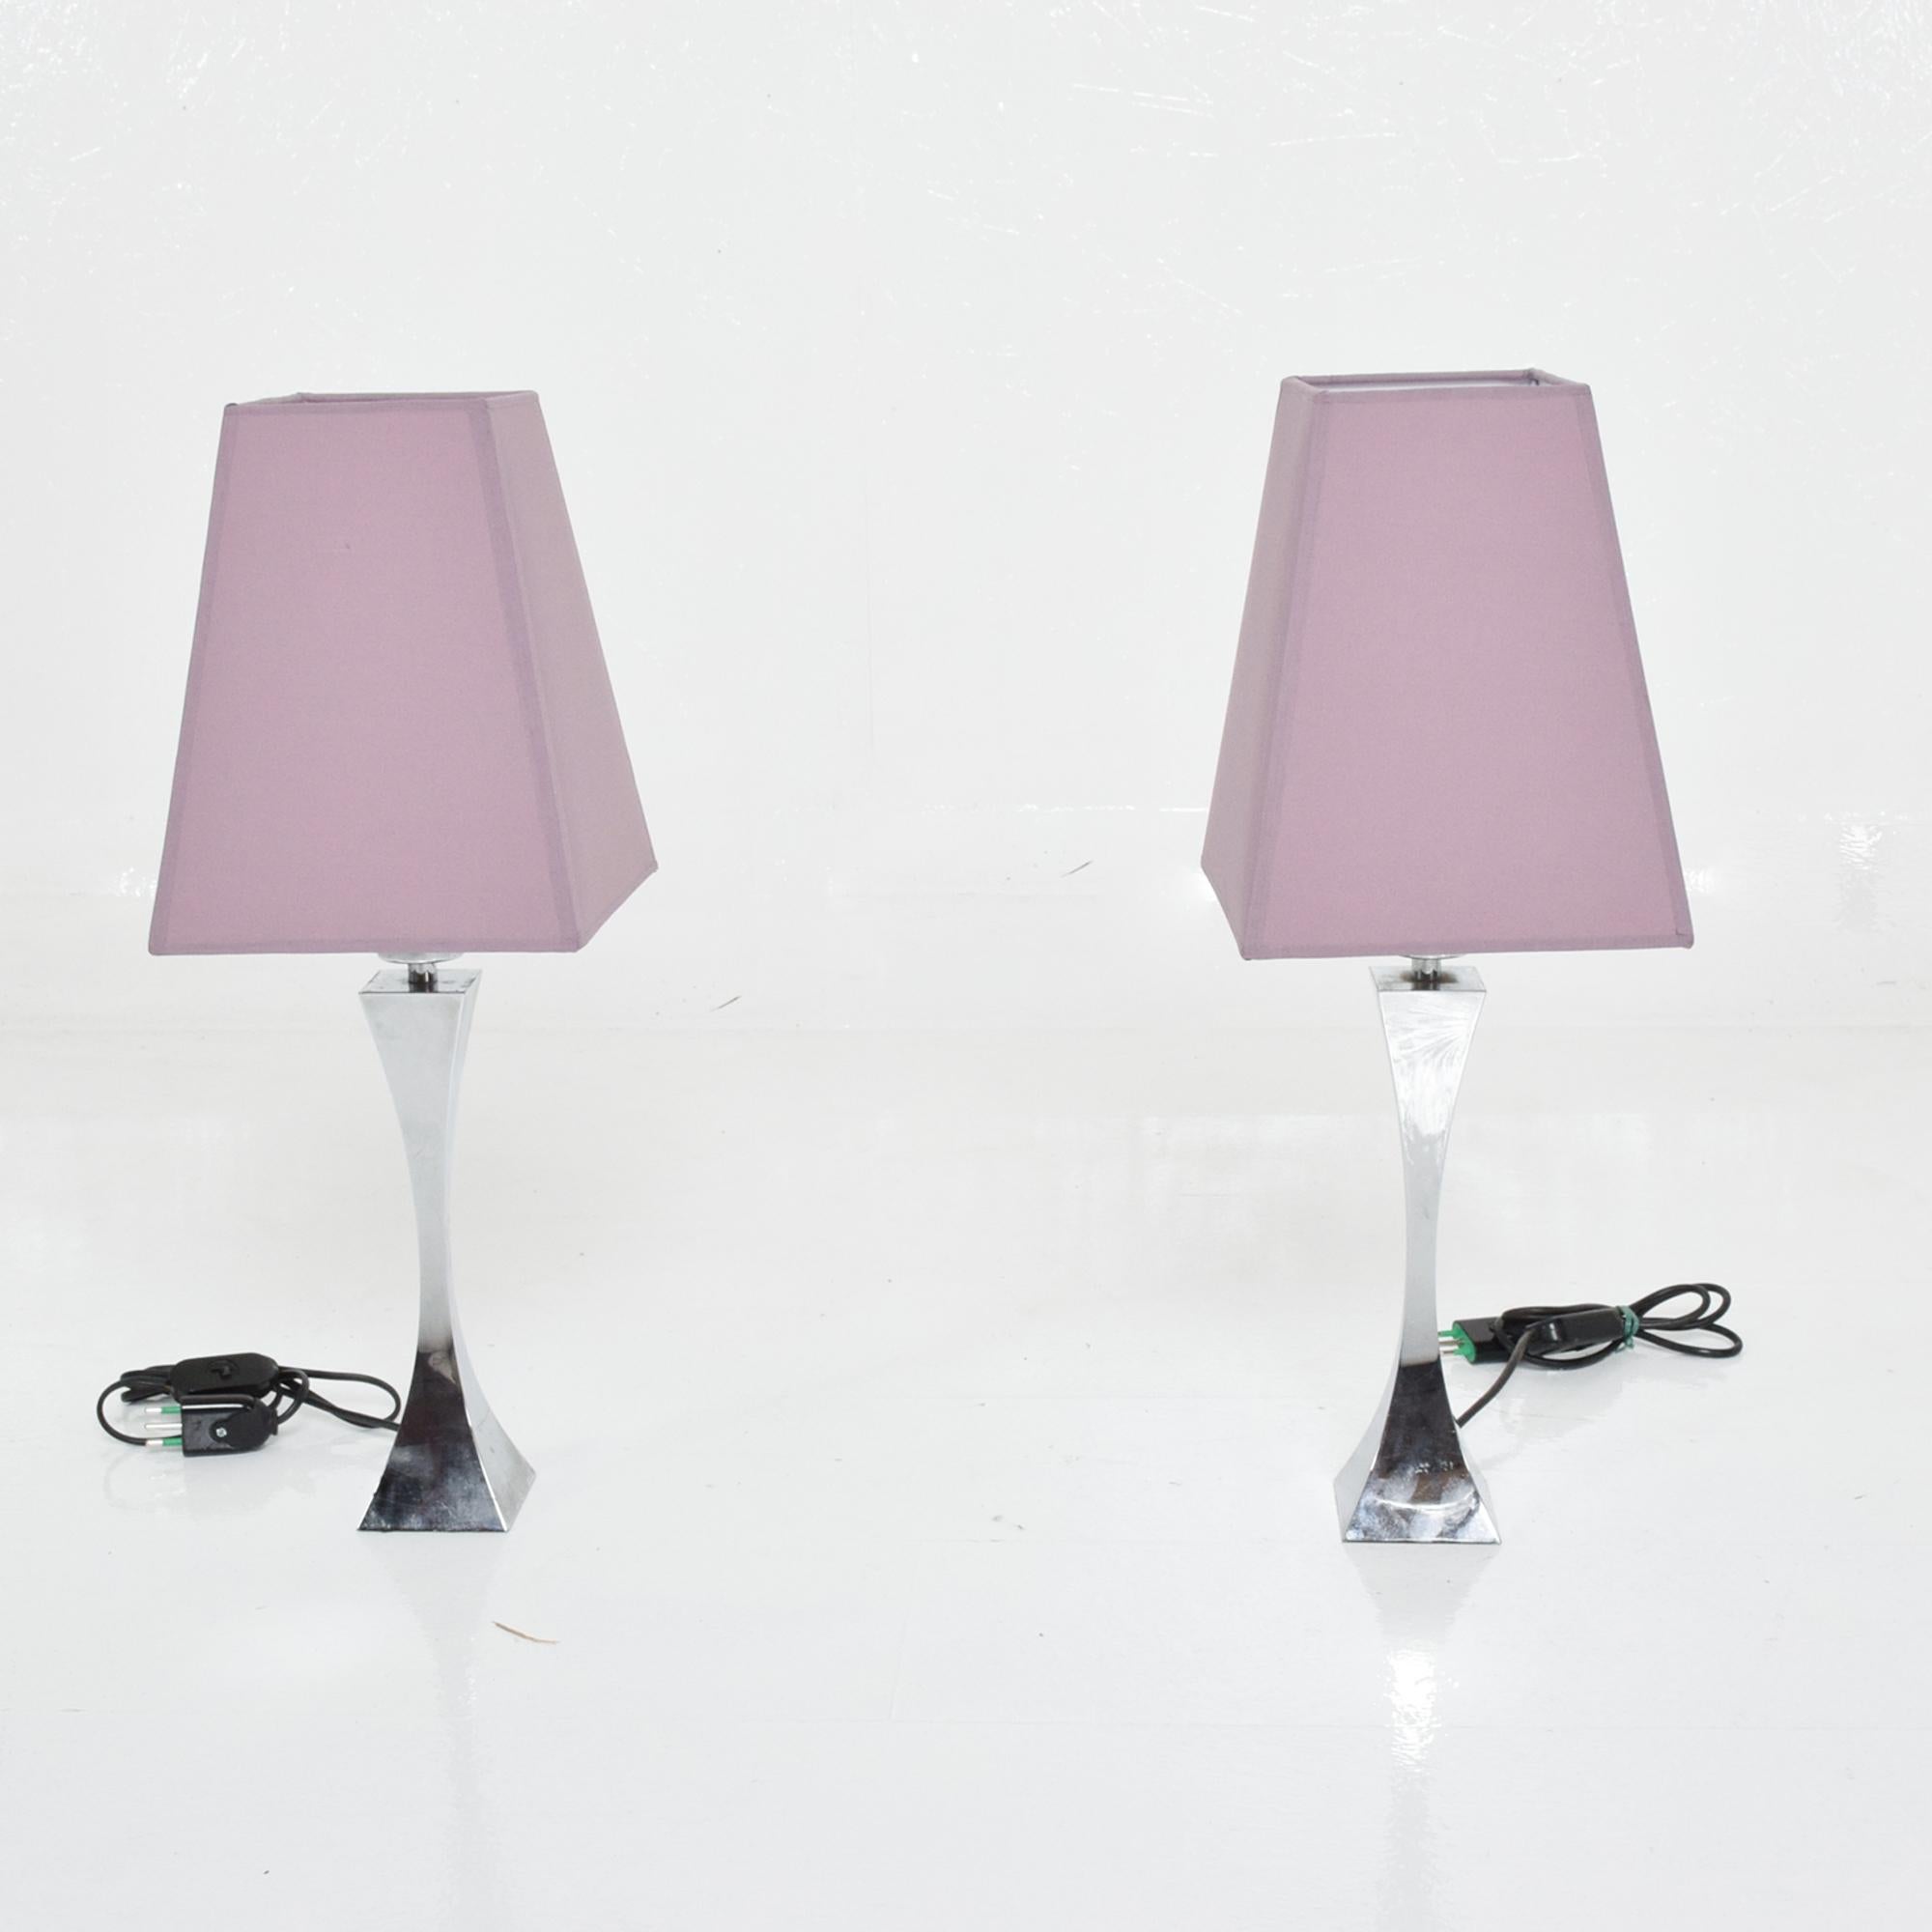 Steel Pyramid High Society Chrome Table Lamps by Tonello & Montagna Grillo Italy 1970s For Sale